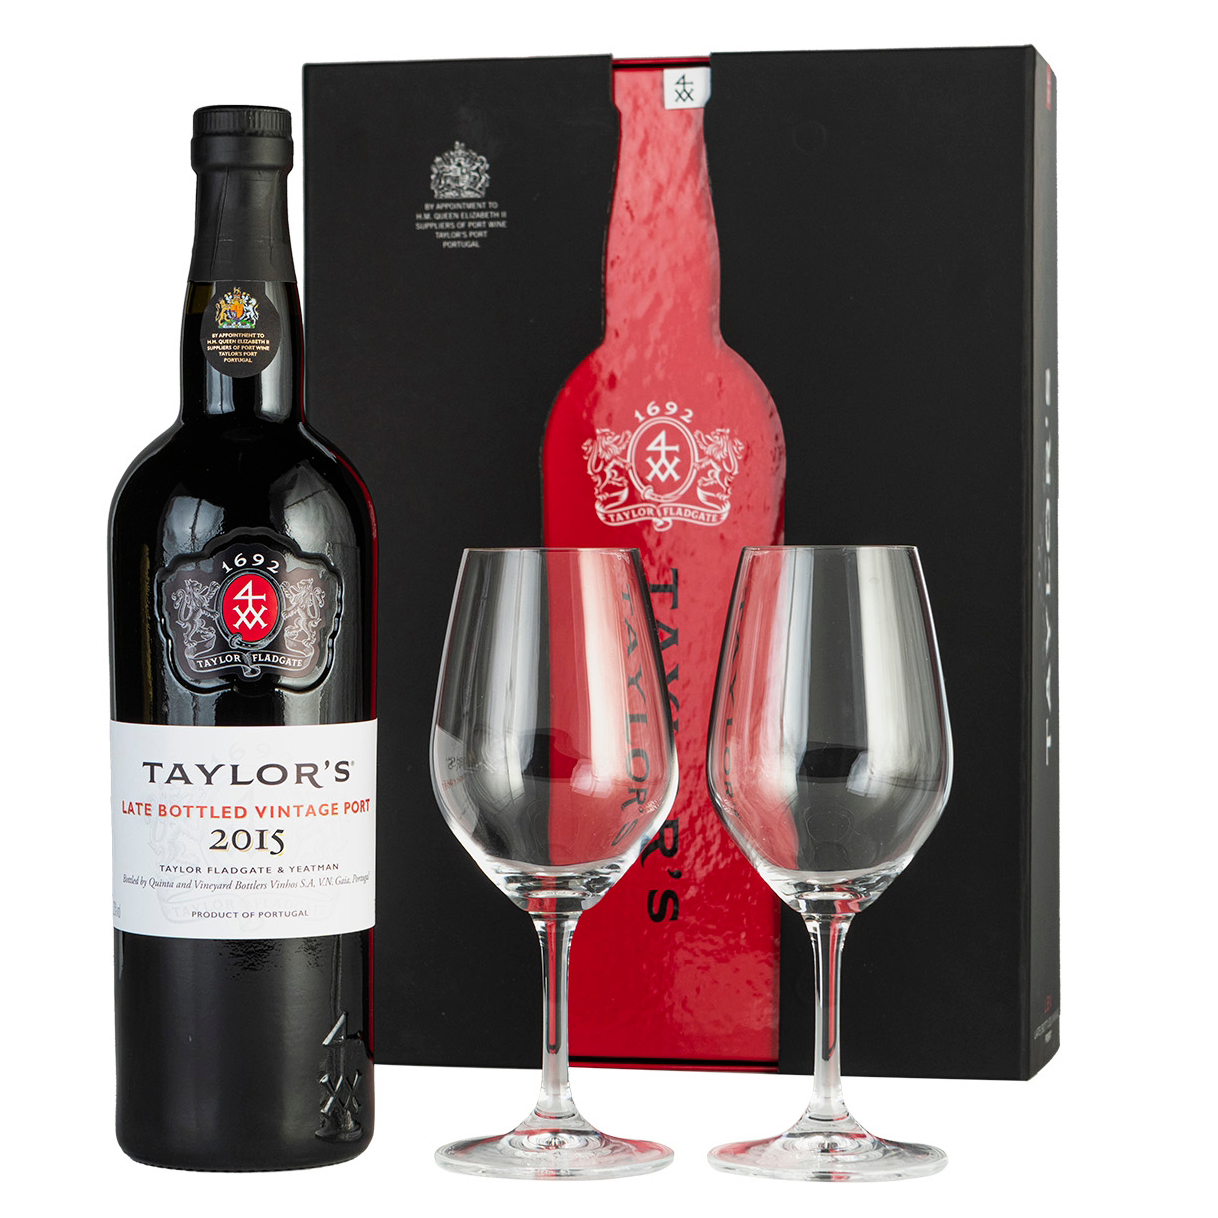 Taylors Late Bottled Vintage Port 2015 And Glasses Gift Box